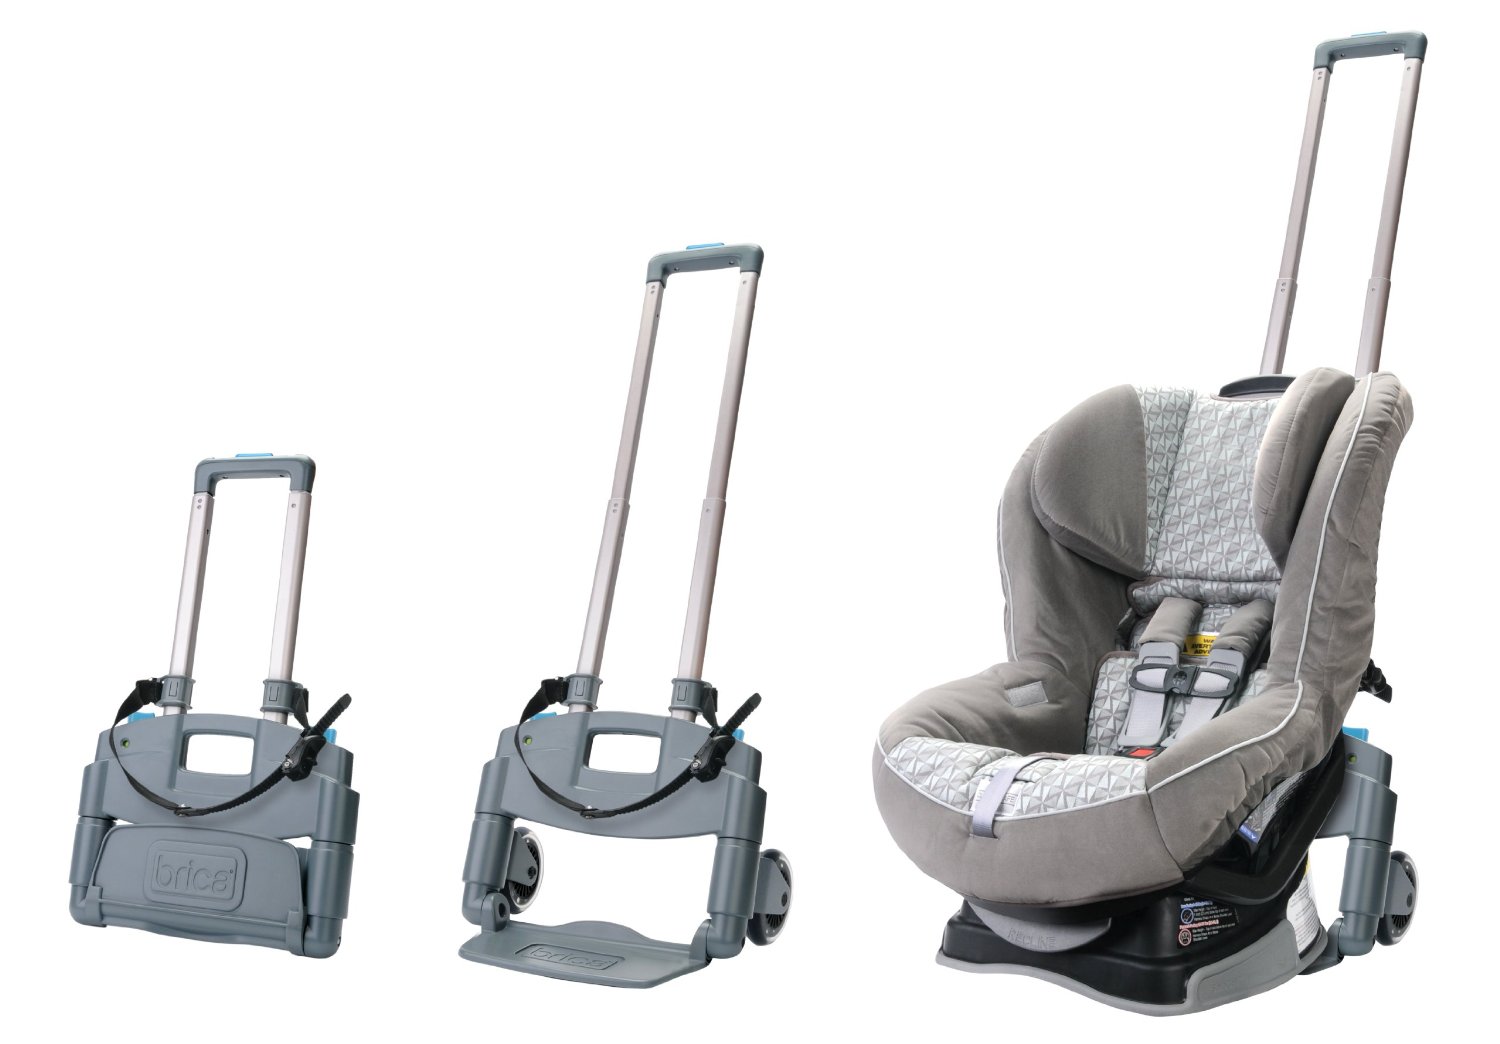 An easy way to get your car seat from the car to the airplane